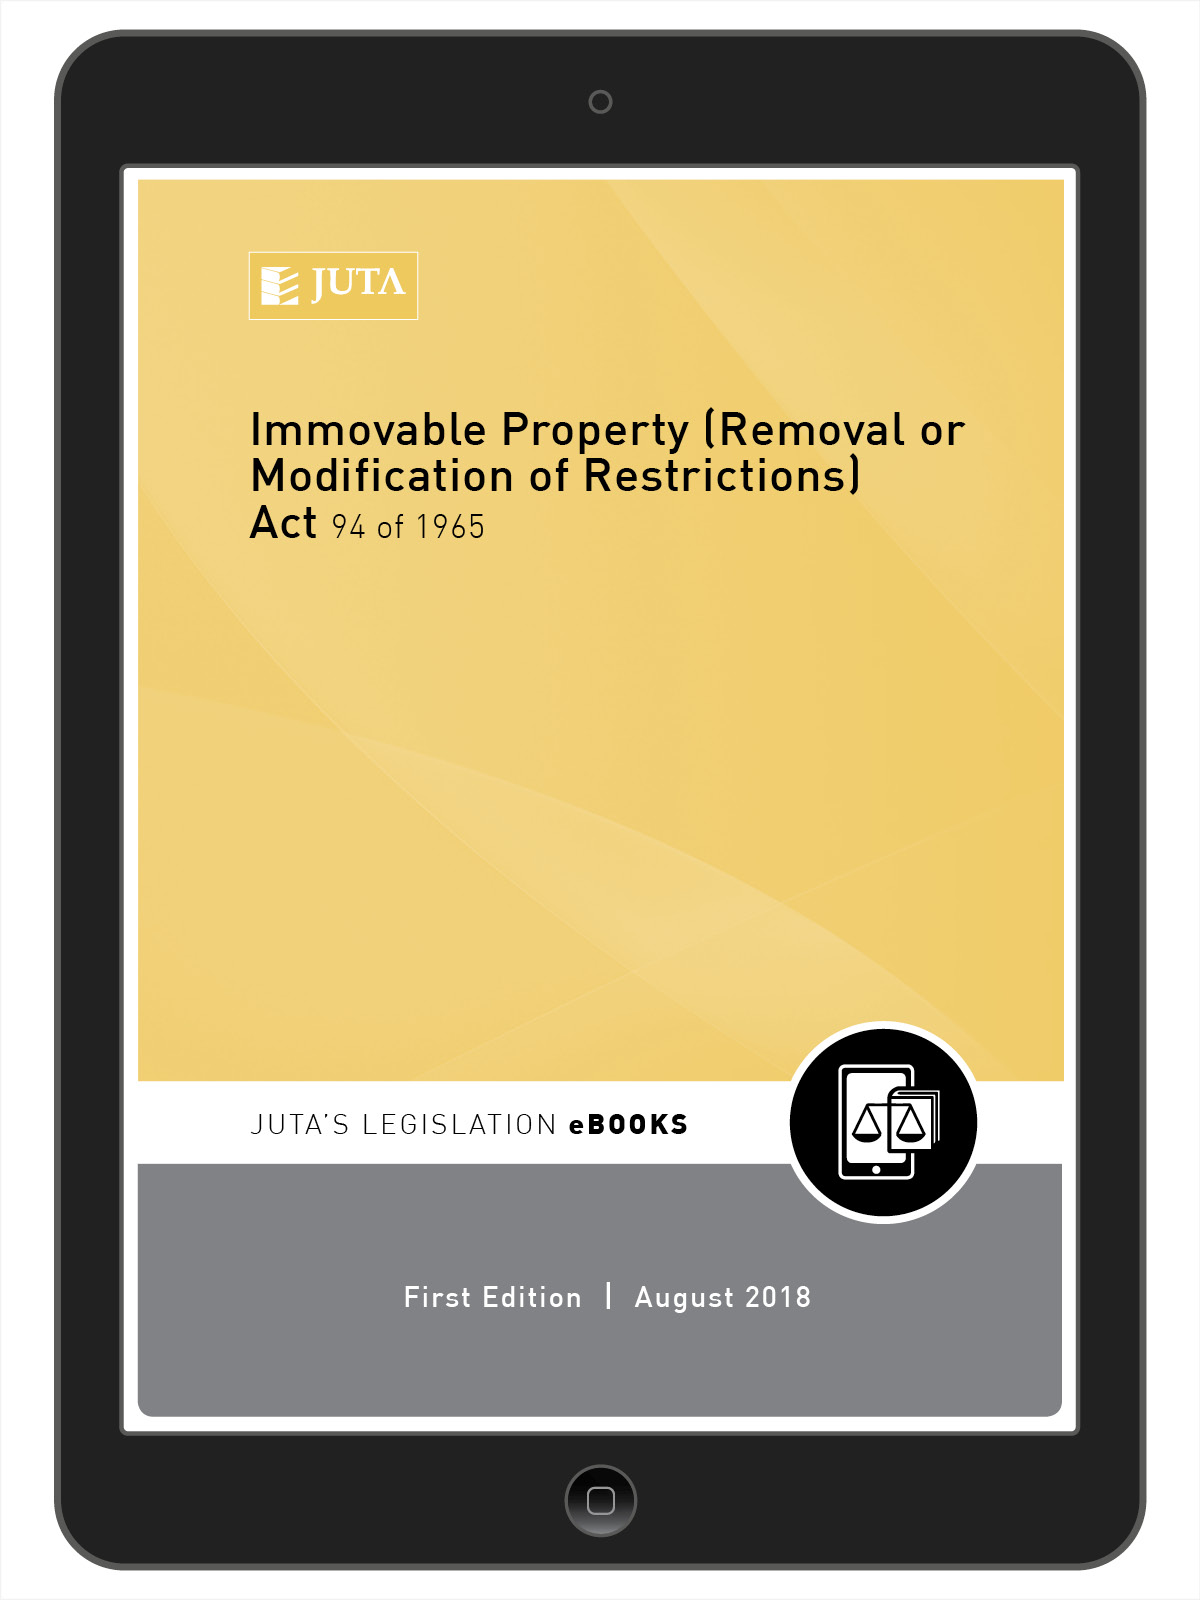 Immovable Property (Removal or Modification of Restrictions) Act 94 of 1965